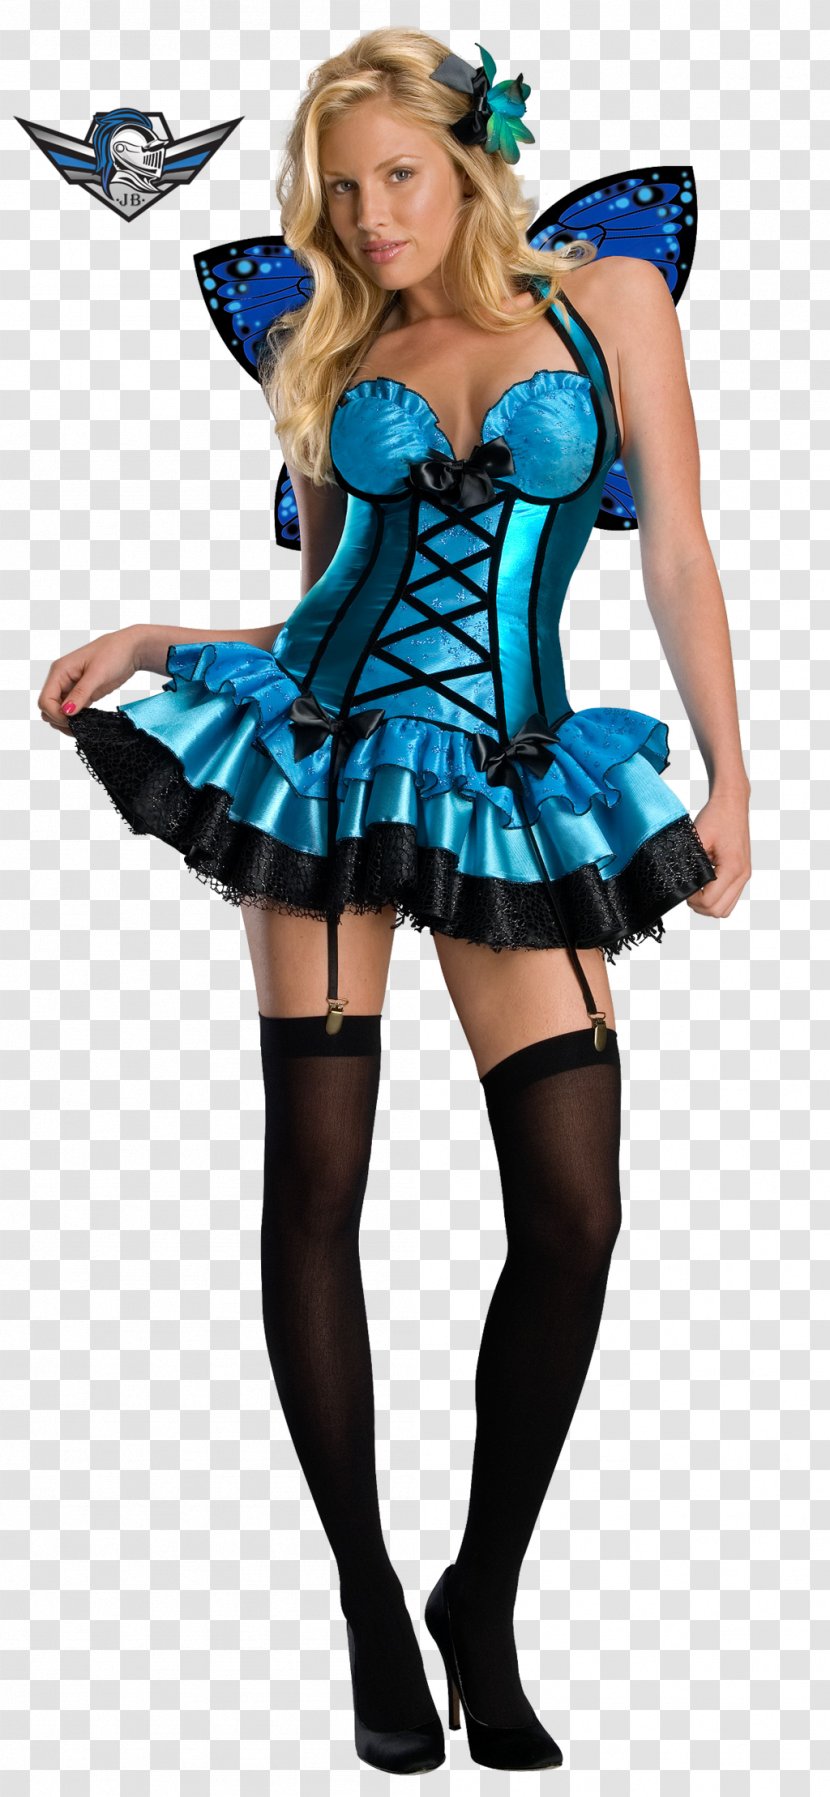 The Fairy With Turquoise Hair Costume Party Halloween Dress - Frame Transparent PNG